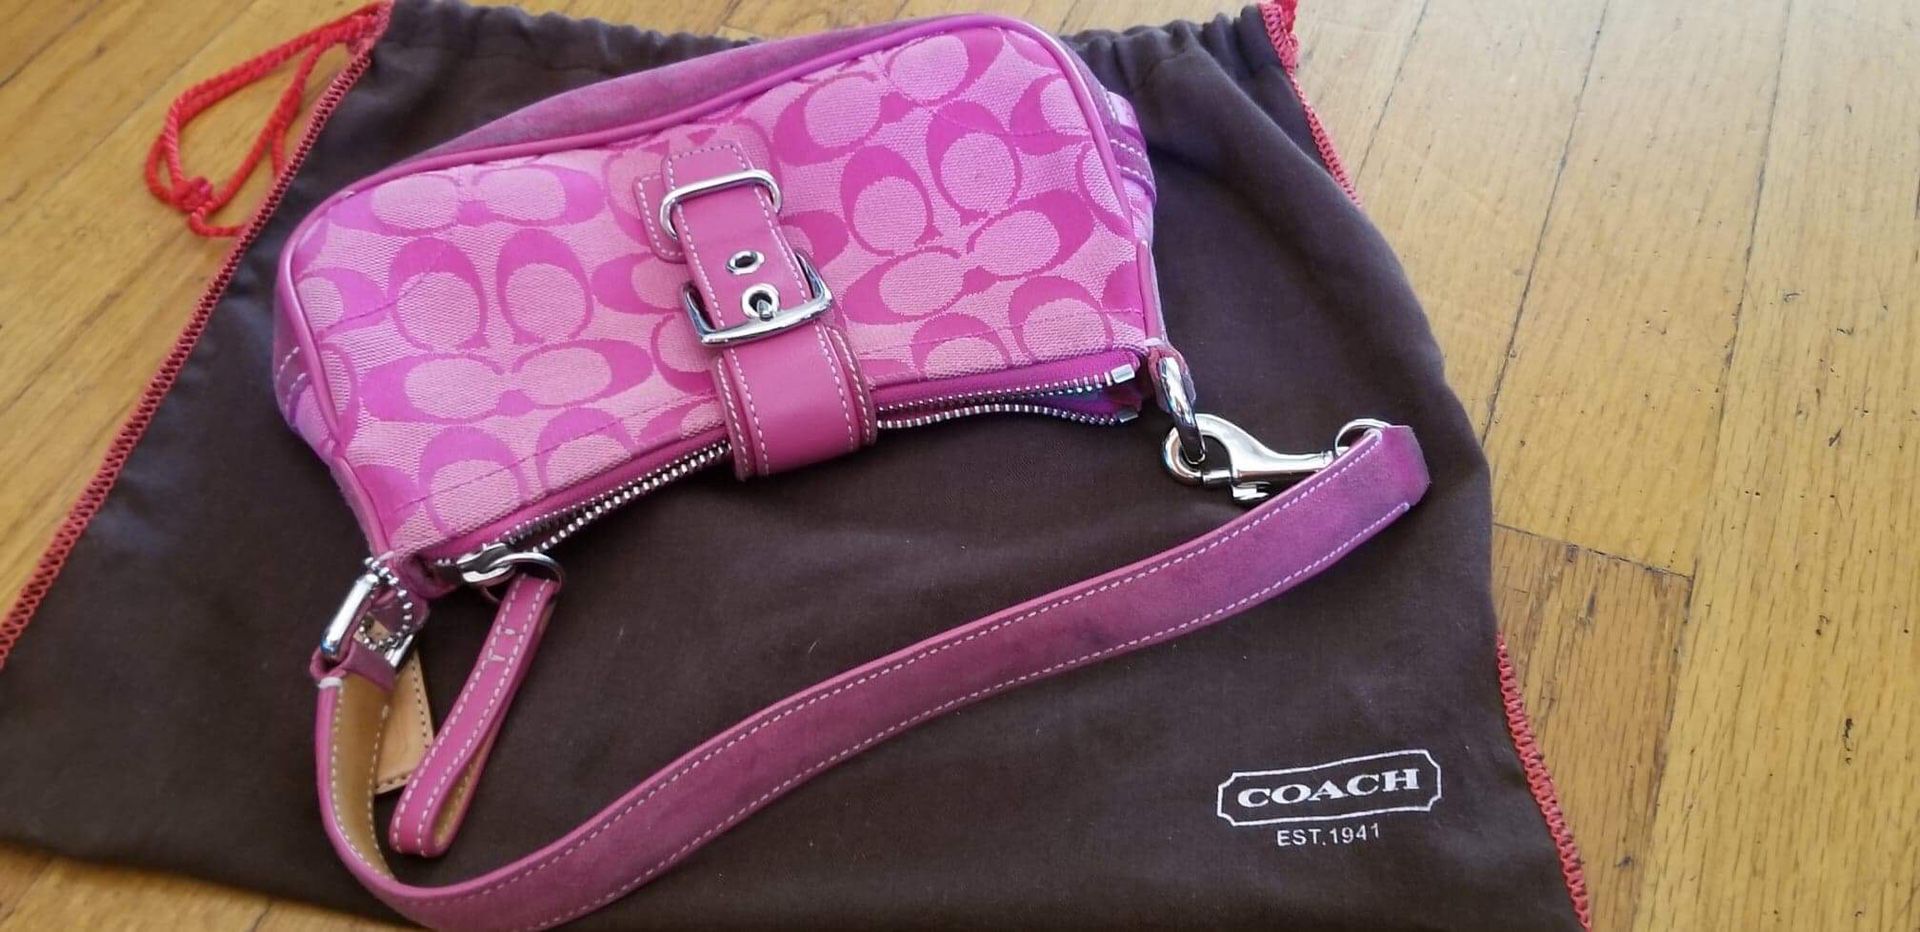 Vintage Pink Coach Bag for Sale in Diamond Bar, CA - OfferUp